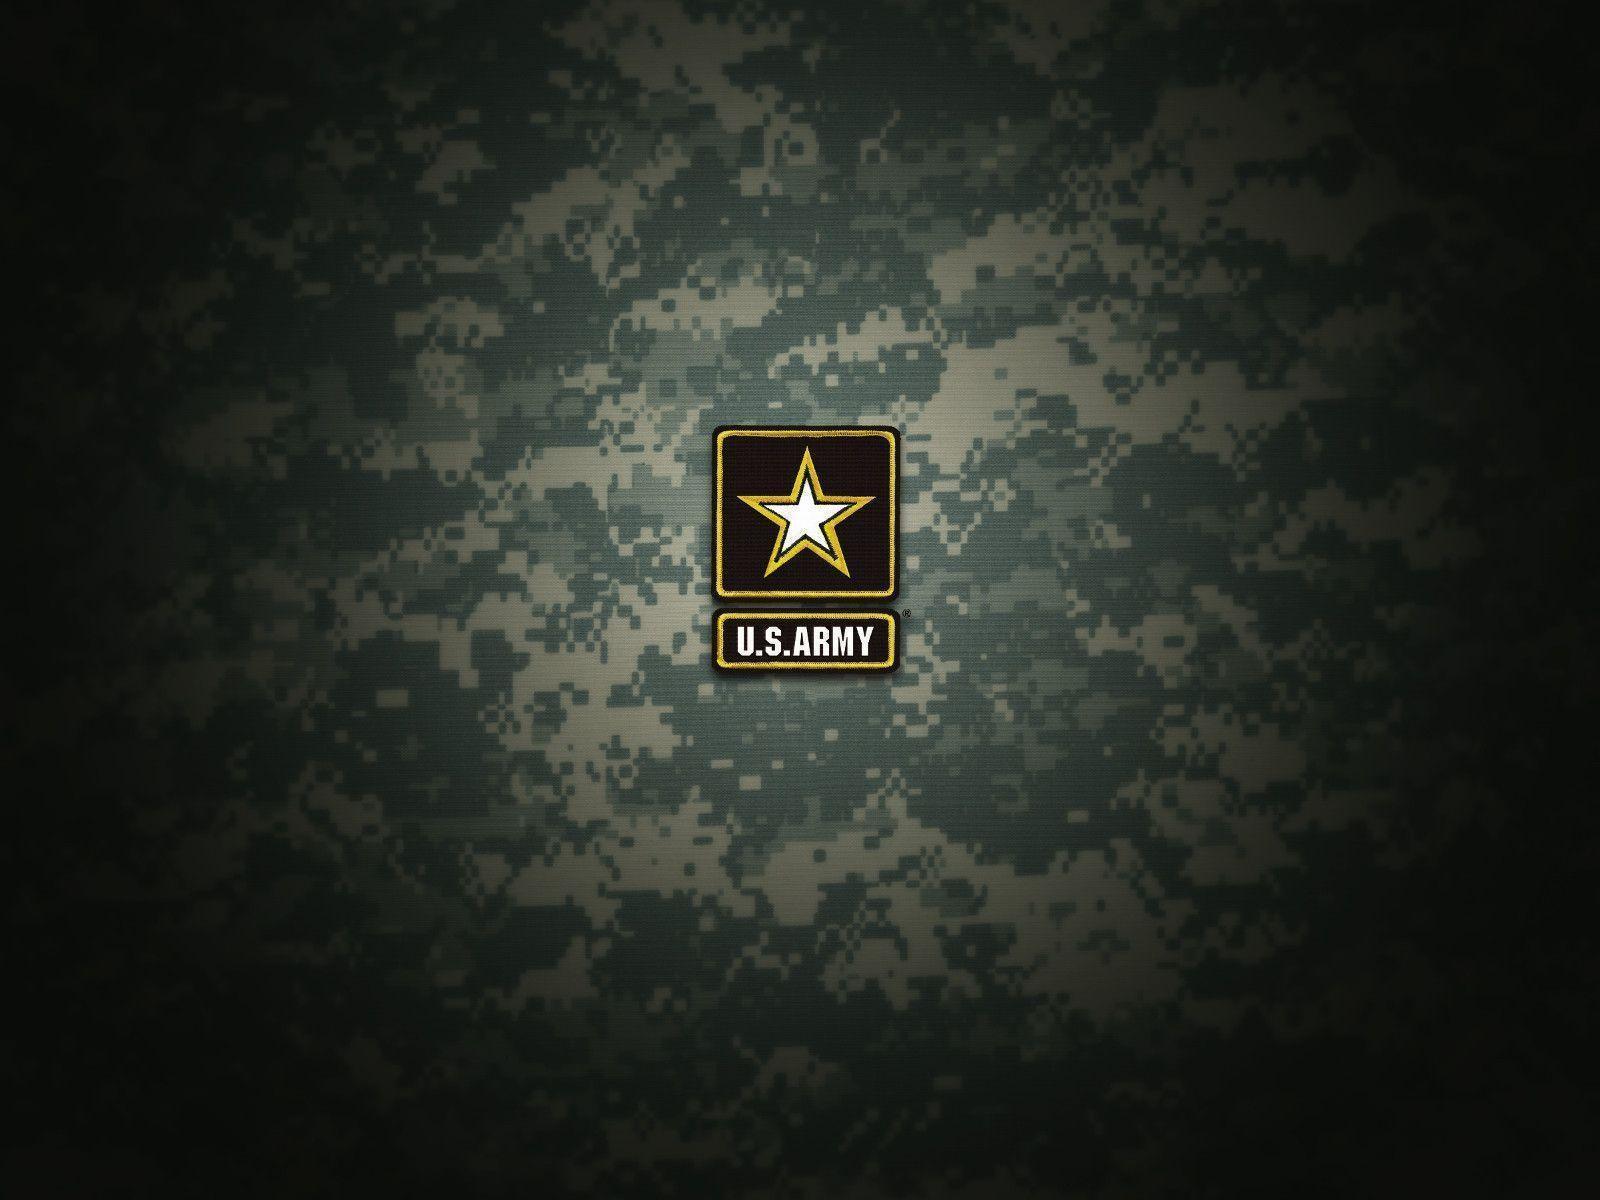 Us Army Wallpaper Background Wallpaper 1600x1200PX Amazing Us